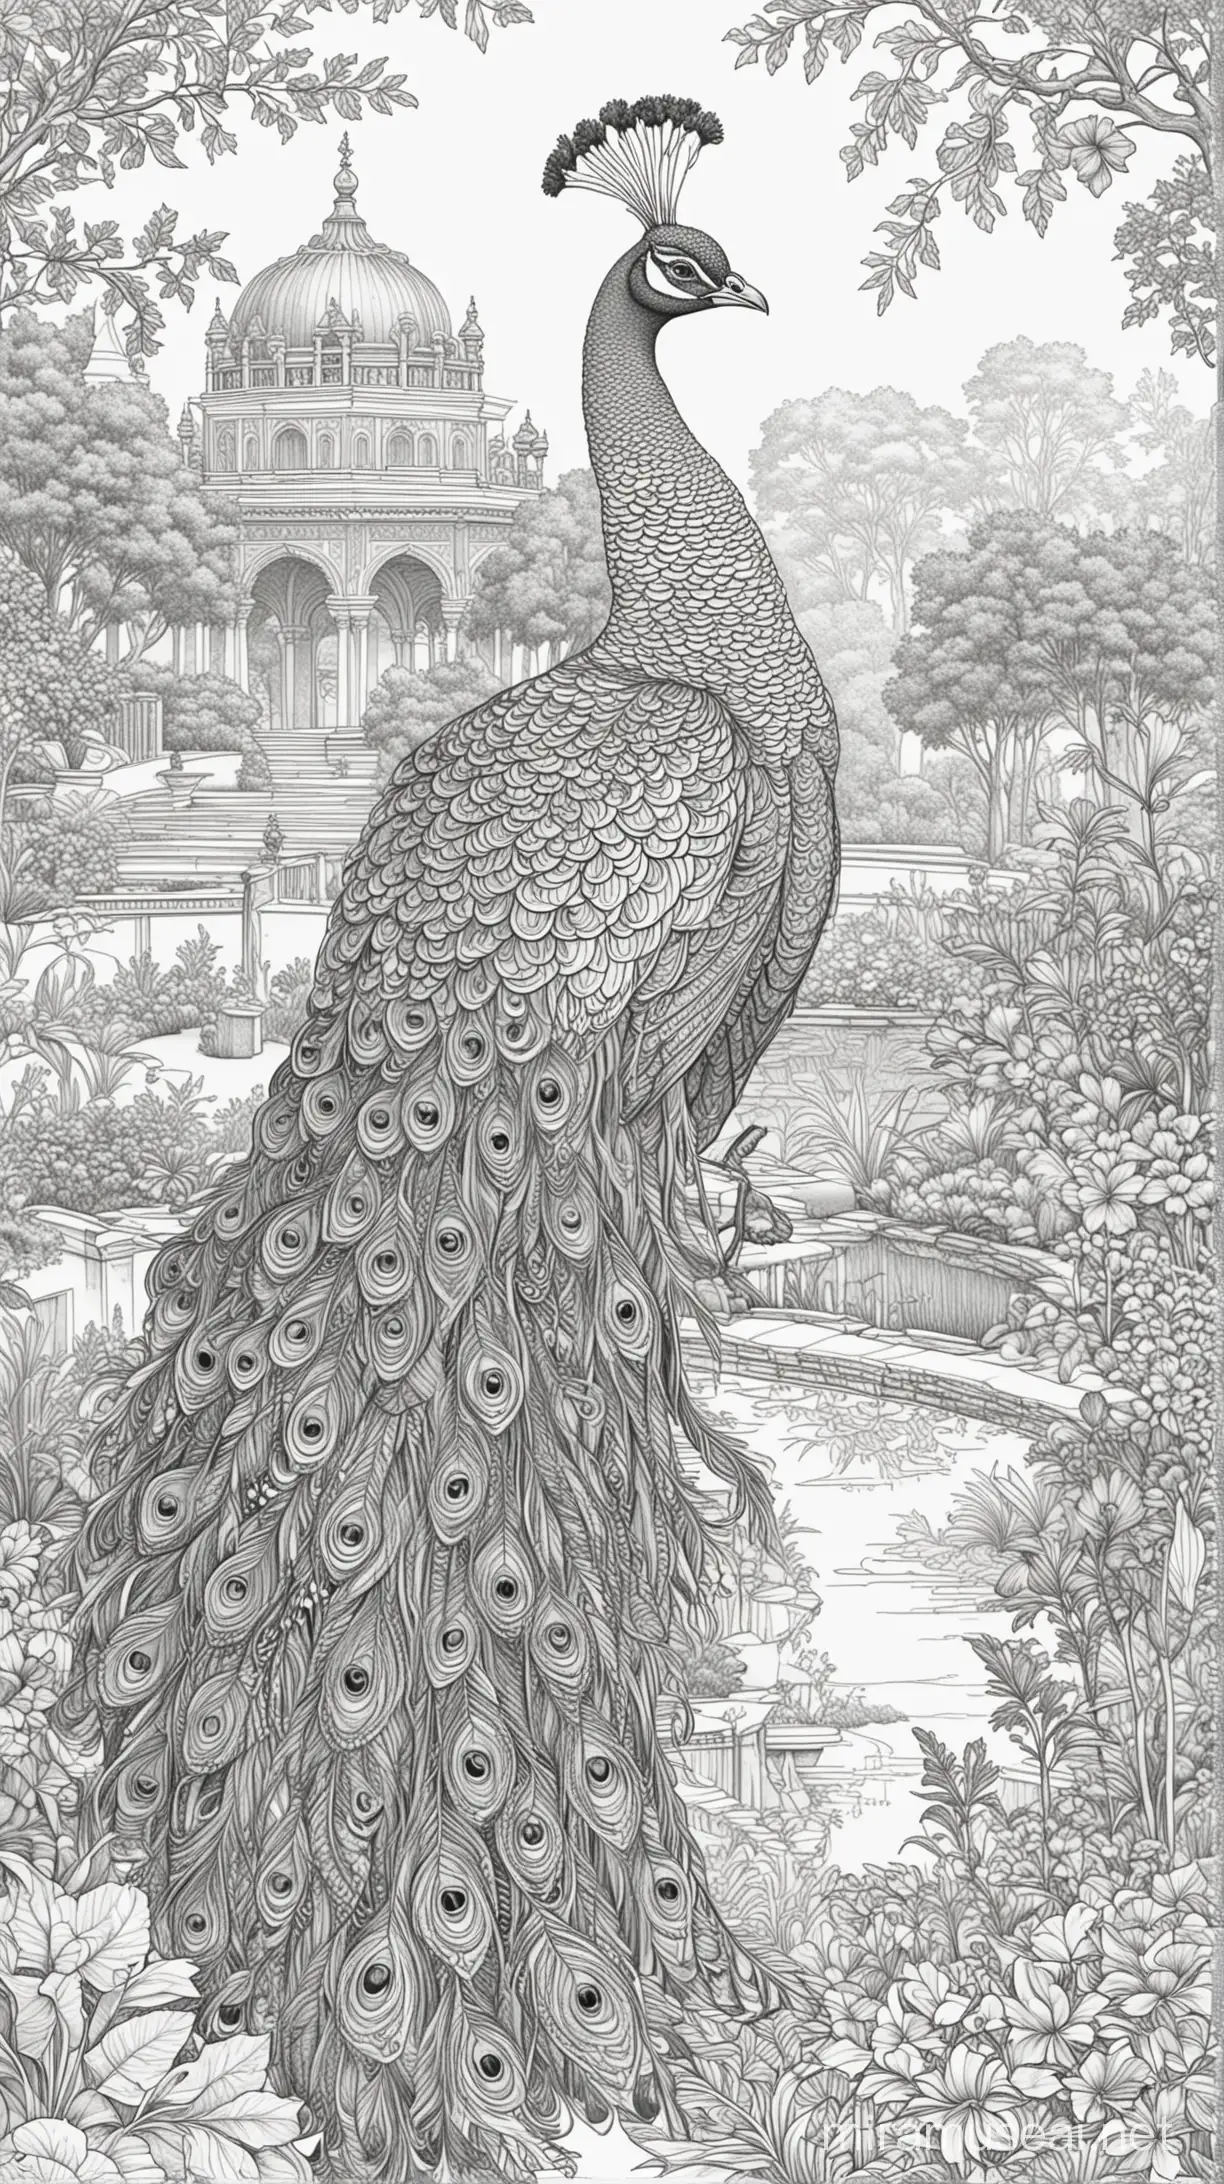 Majestic Peacock in Monochrome Palace Garden for Adult Coloring Book